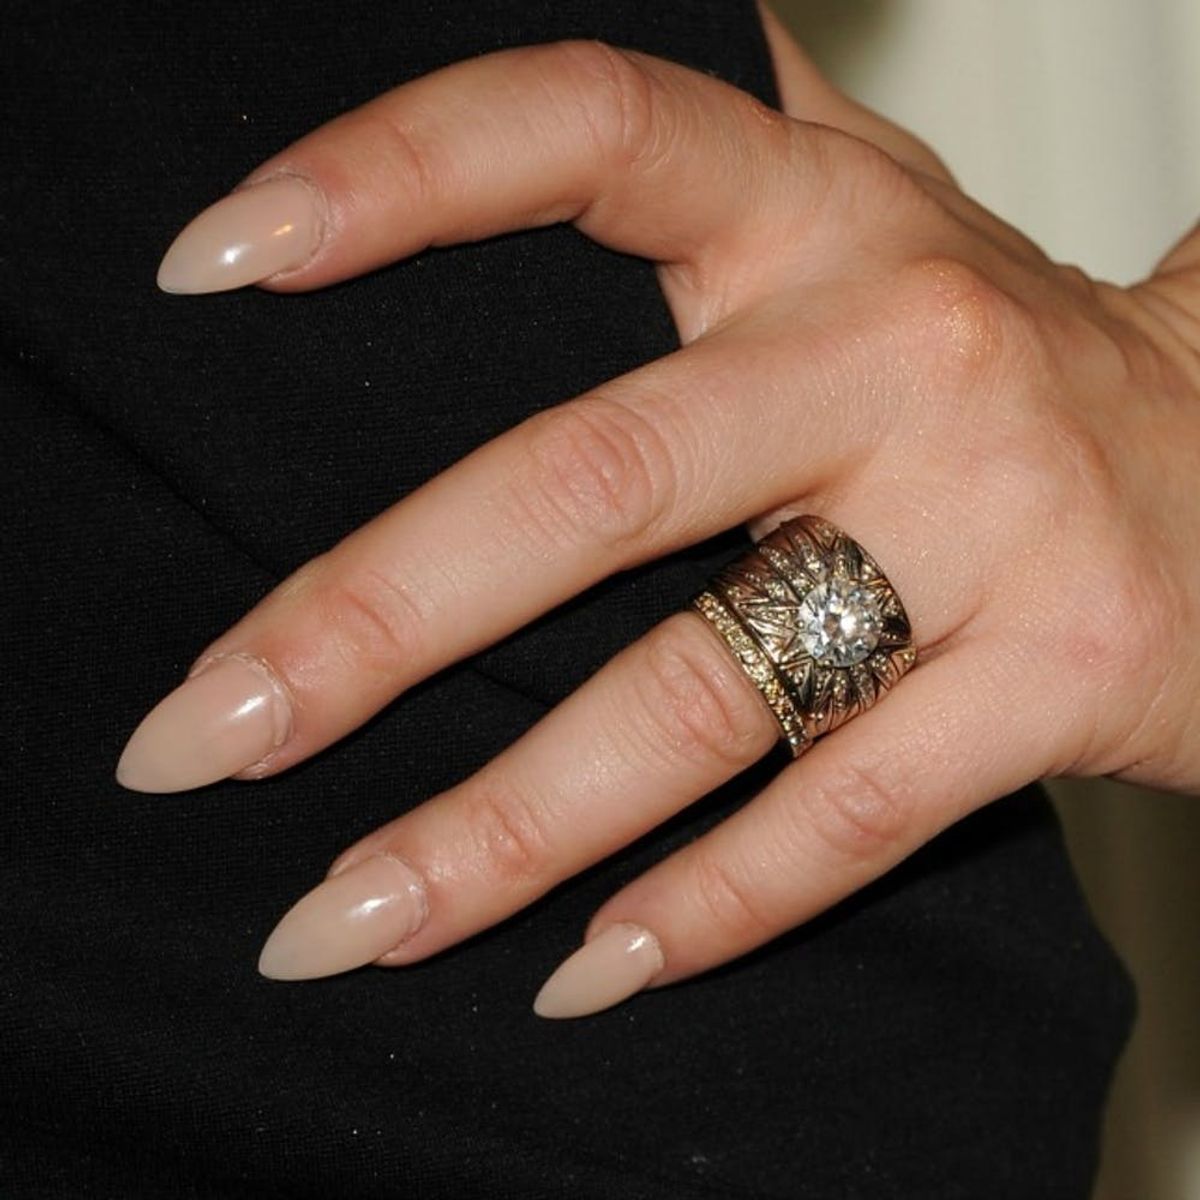 The 14 Coolest, Most Extravagant Celeb Engagement Rings We’ve Ever Seen